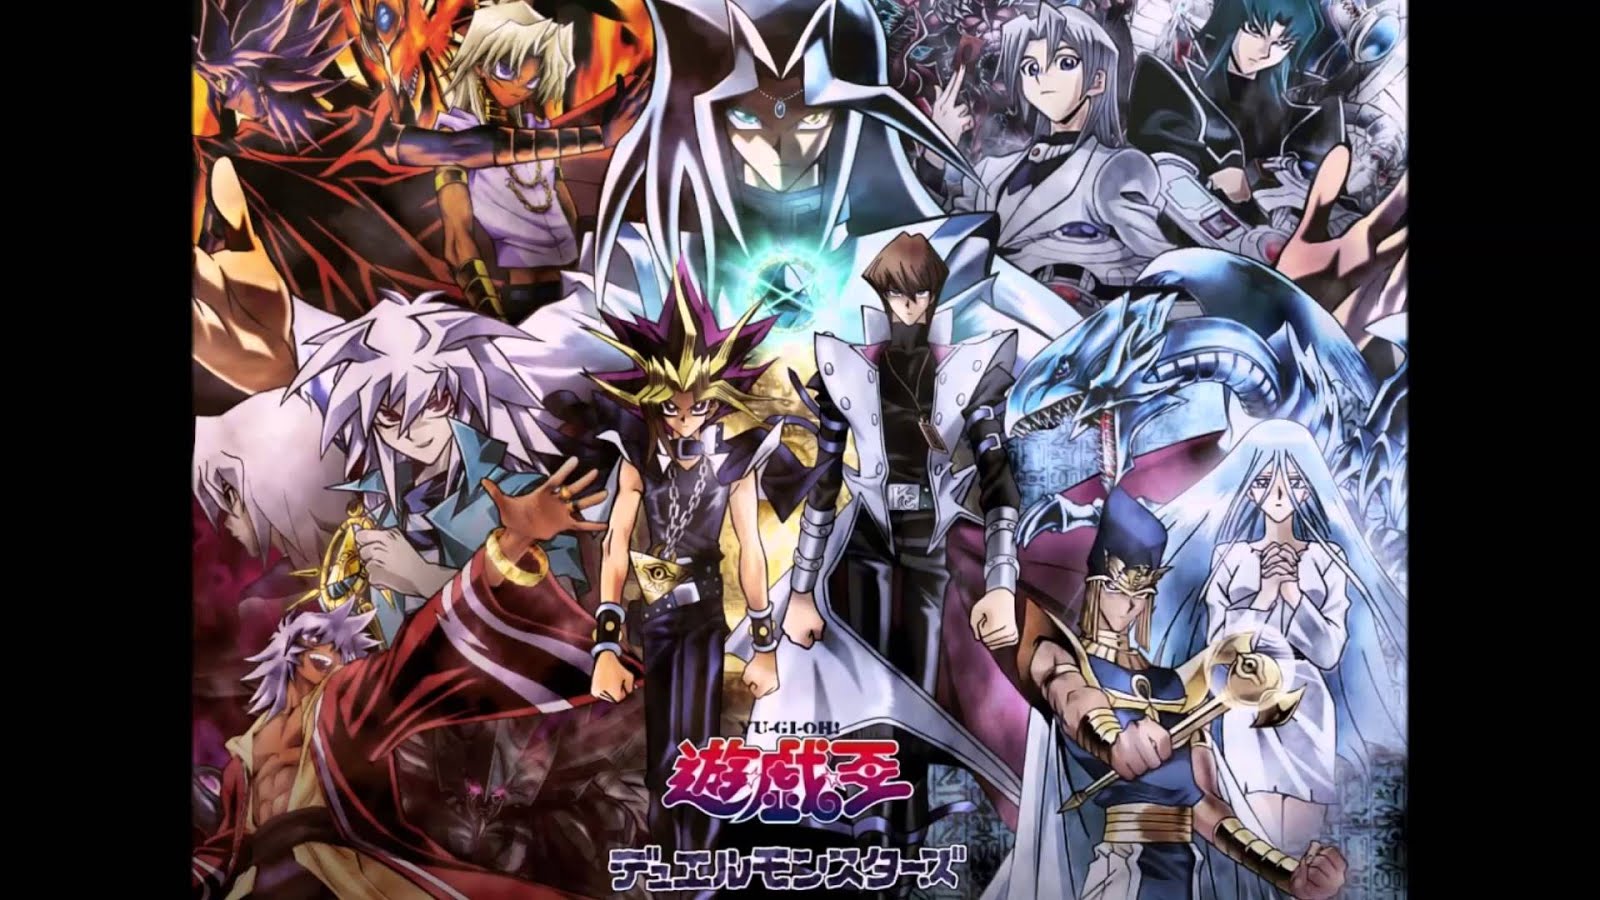 download yu gi oh duel monster episode 2 subtitle indonesia